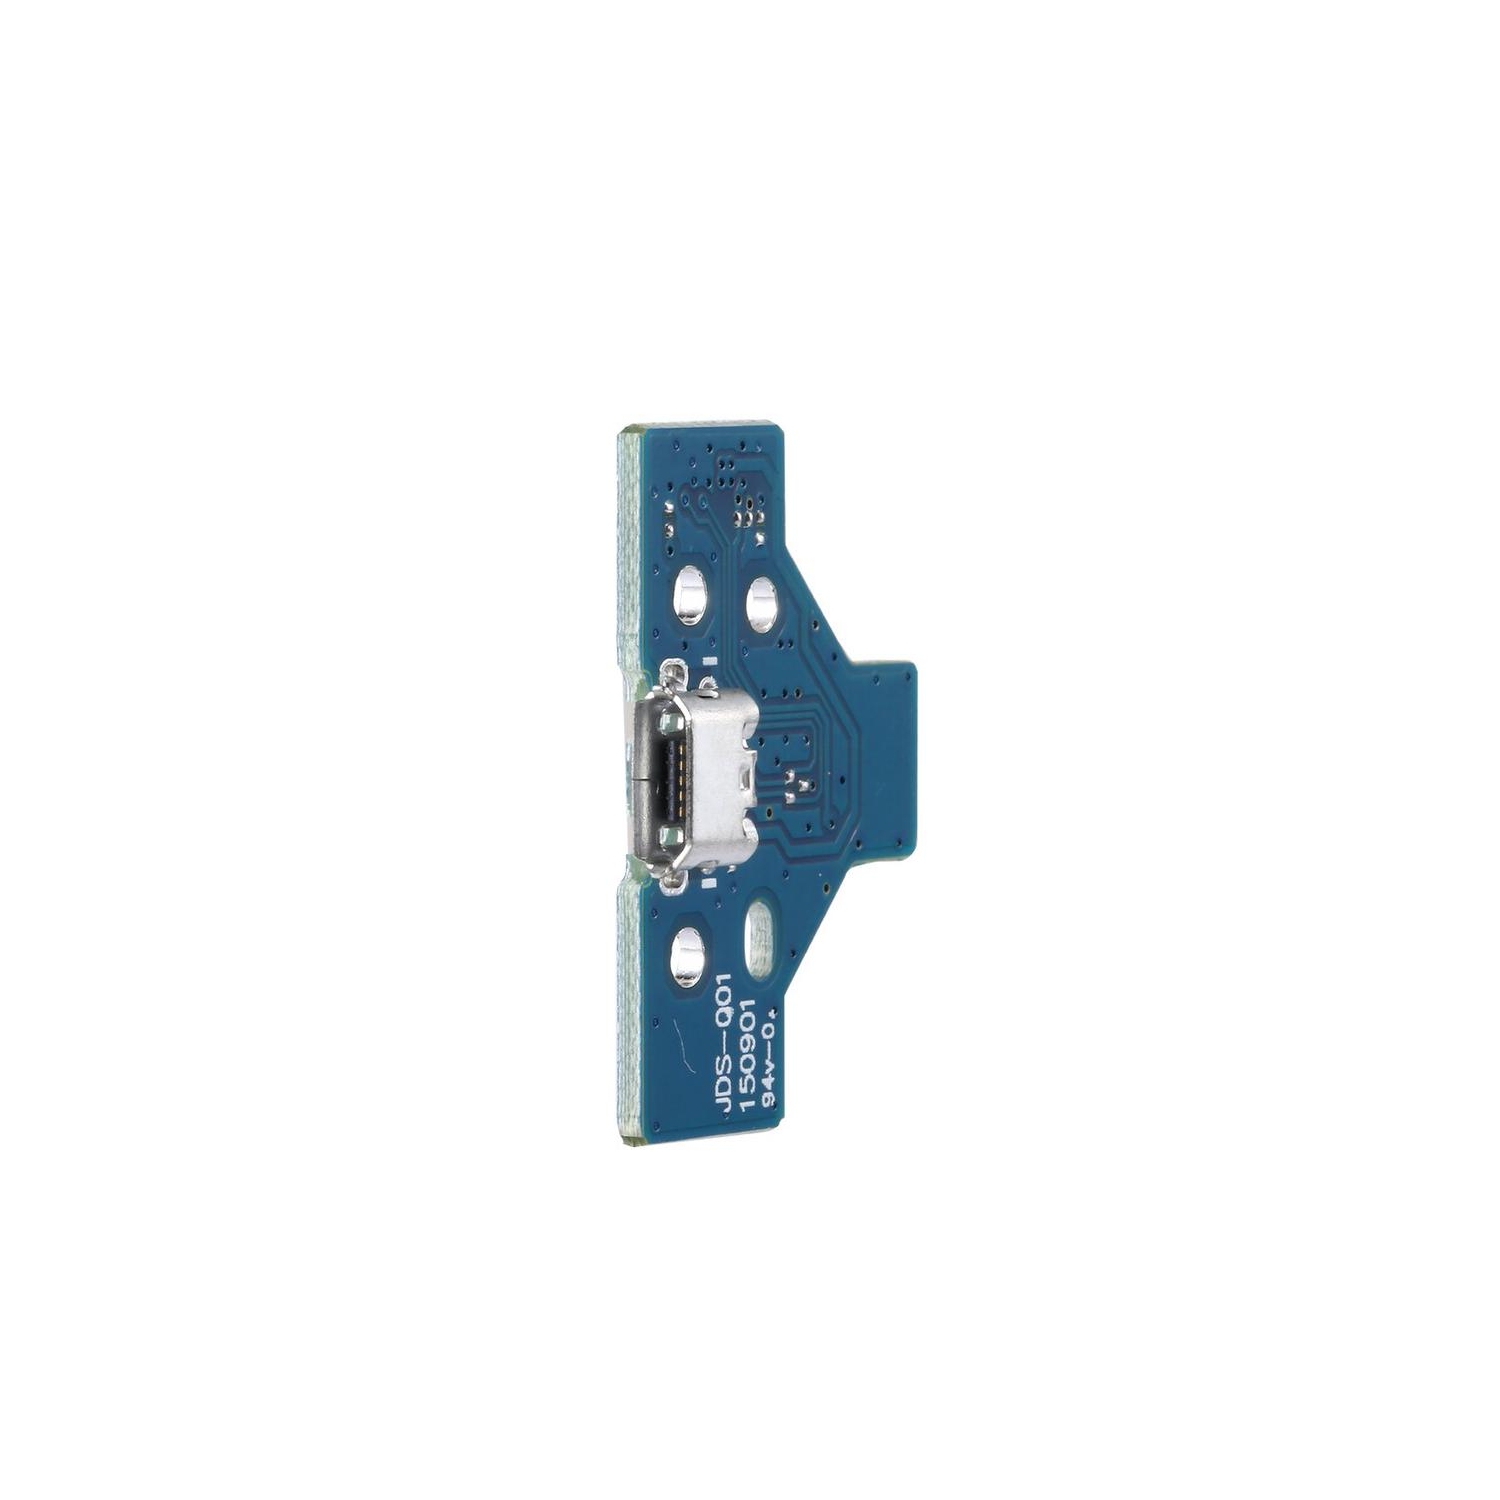 Replacement USB Charging Port Board W/ 14Pin Flex Cable Compatible With PlayStation 4 Controllers (Version 1: JDS-001)